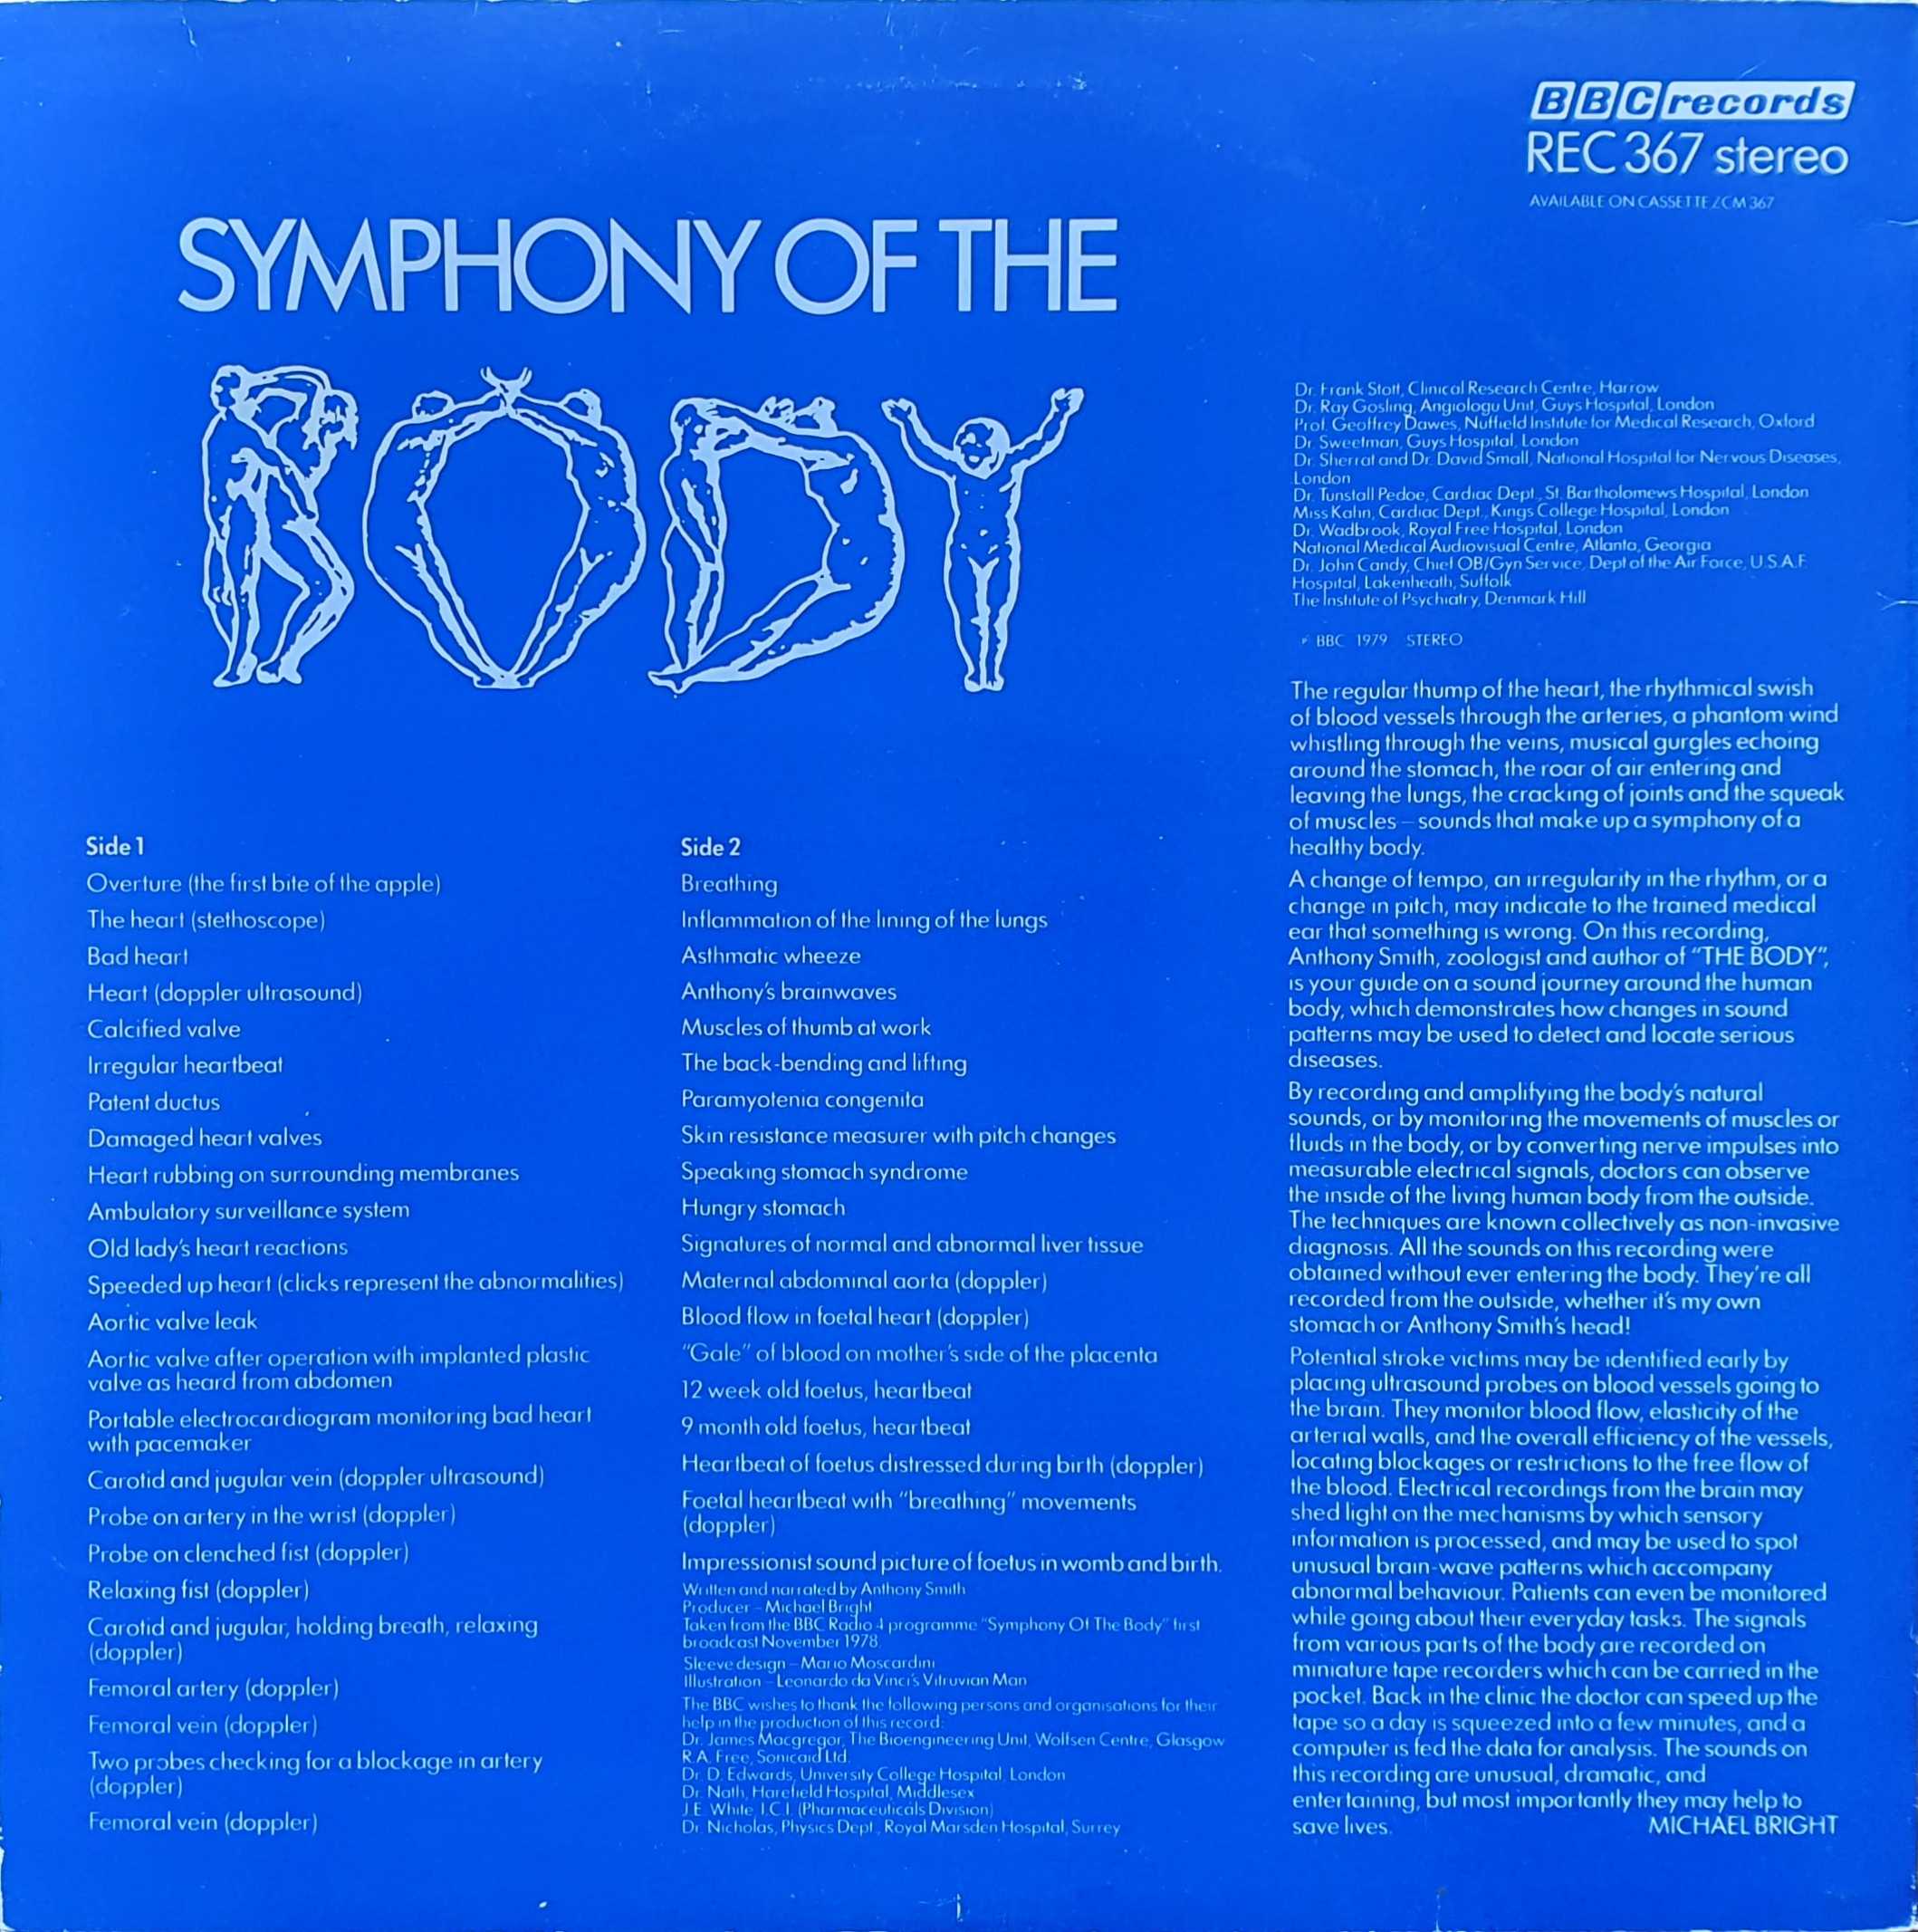 Picture of REC 367 Symphony of the body by artist Anthony Smith from the BBC records and Tapes library